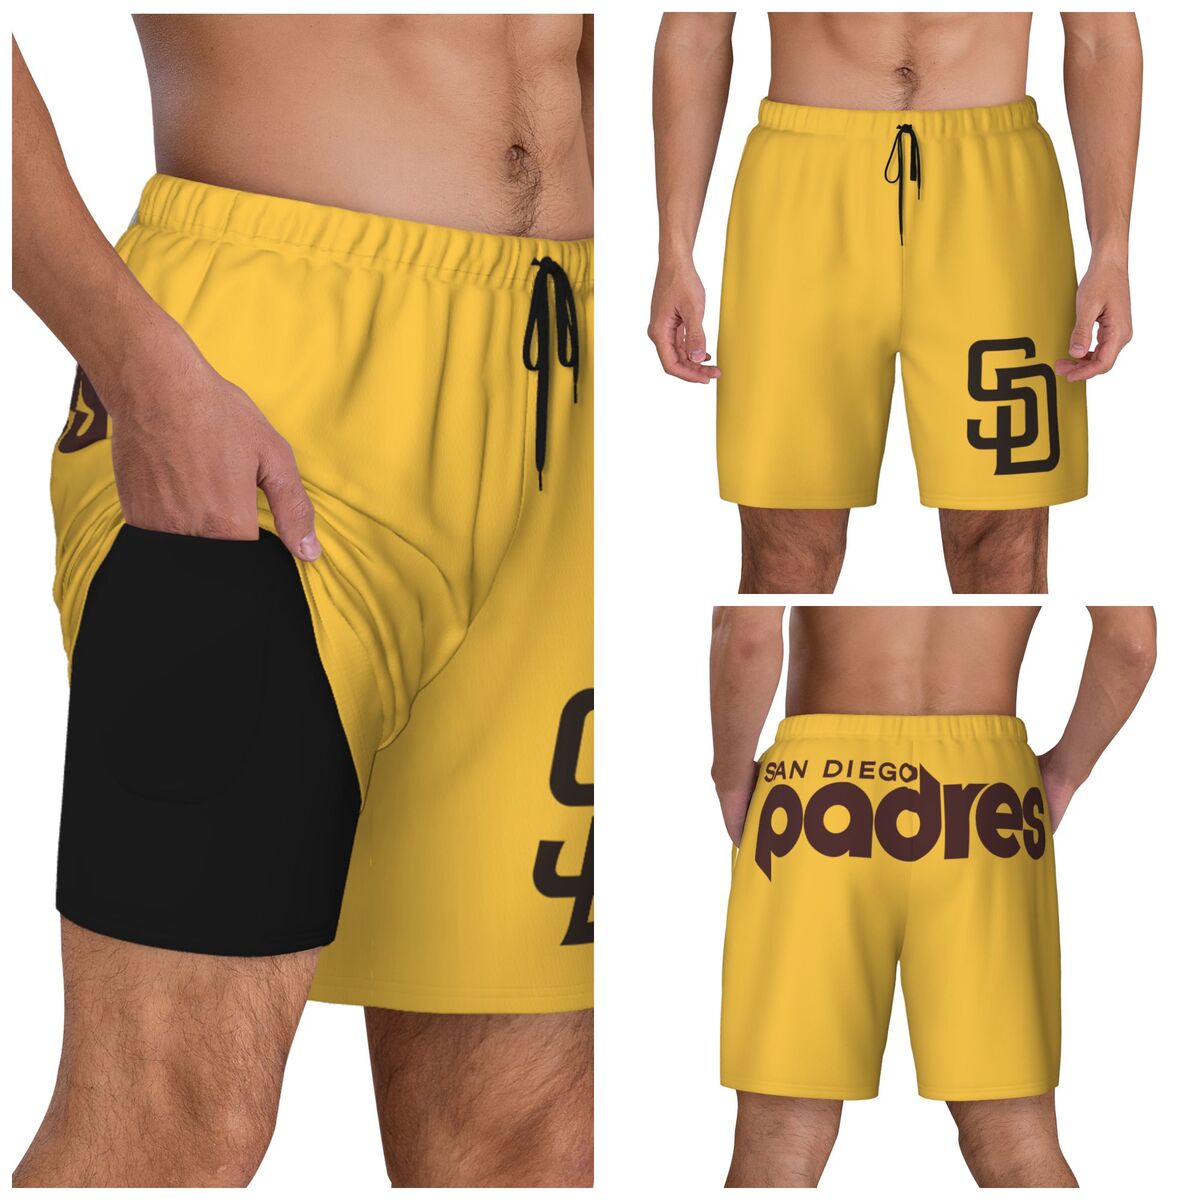 San Diego Padres Men's Swim Trunks with Compression Liner